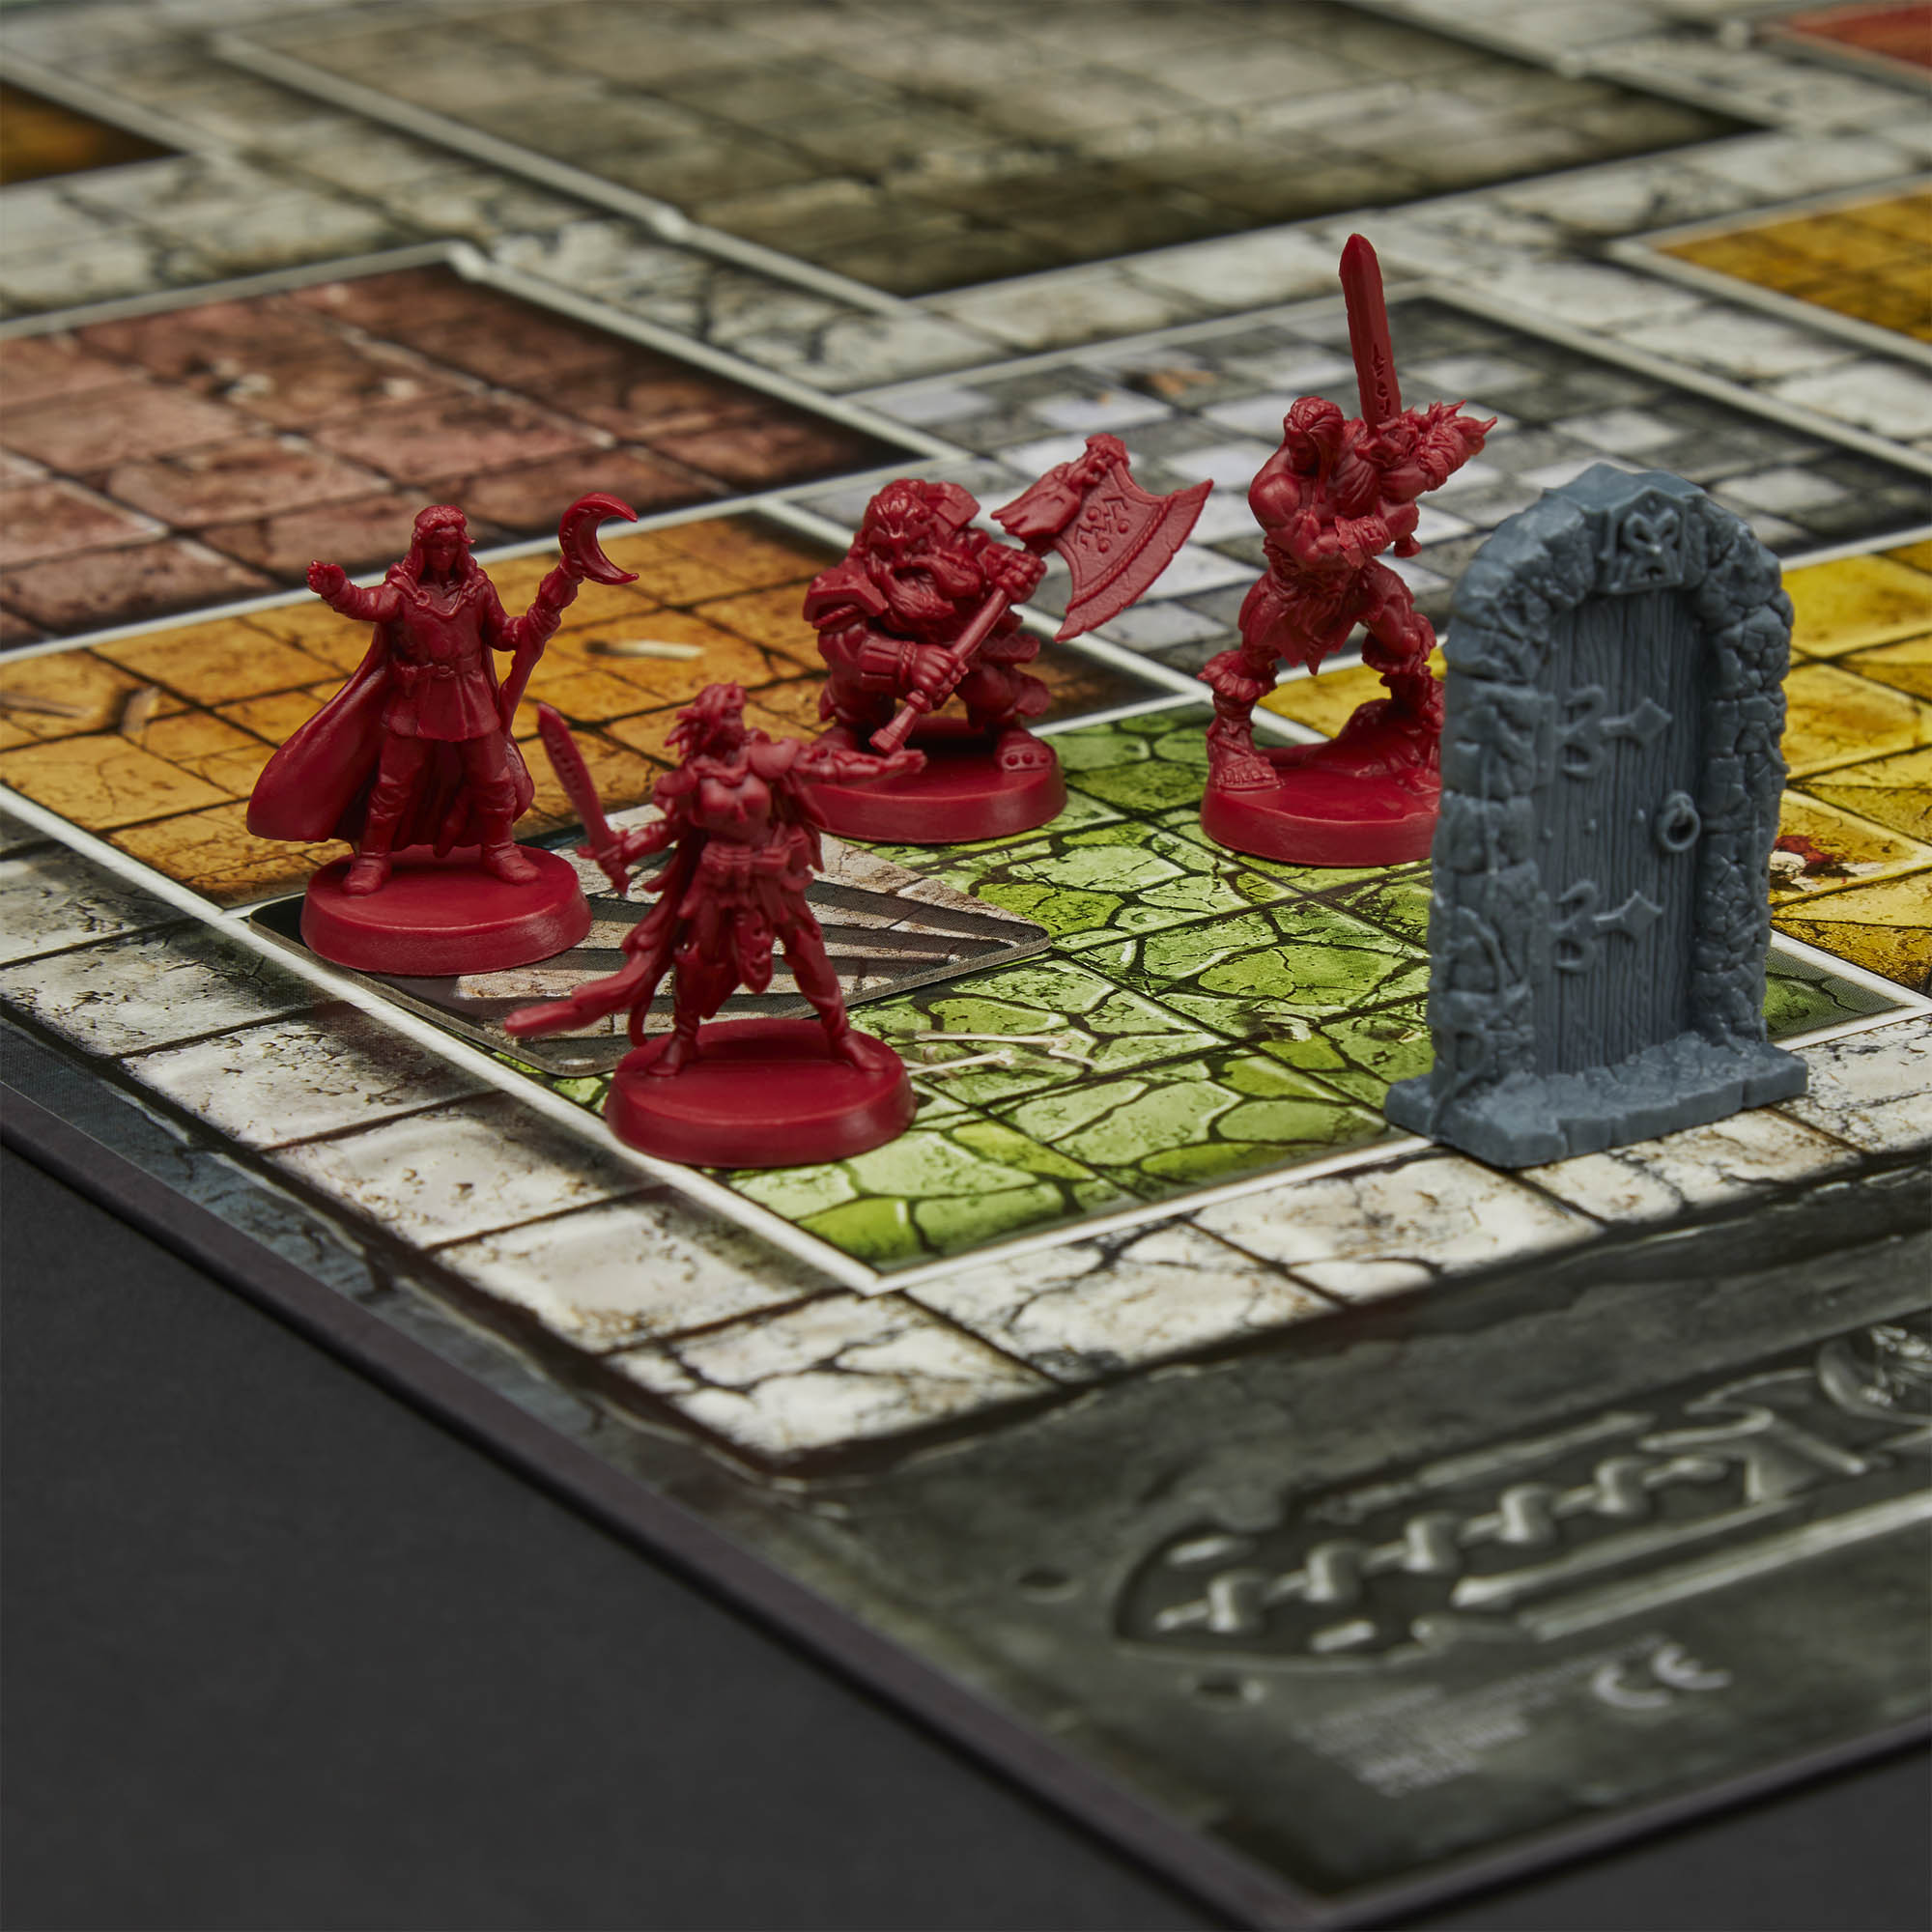 Heroquest Strategy game